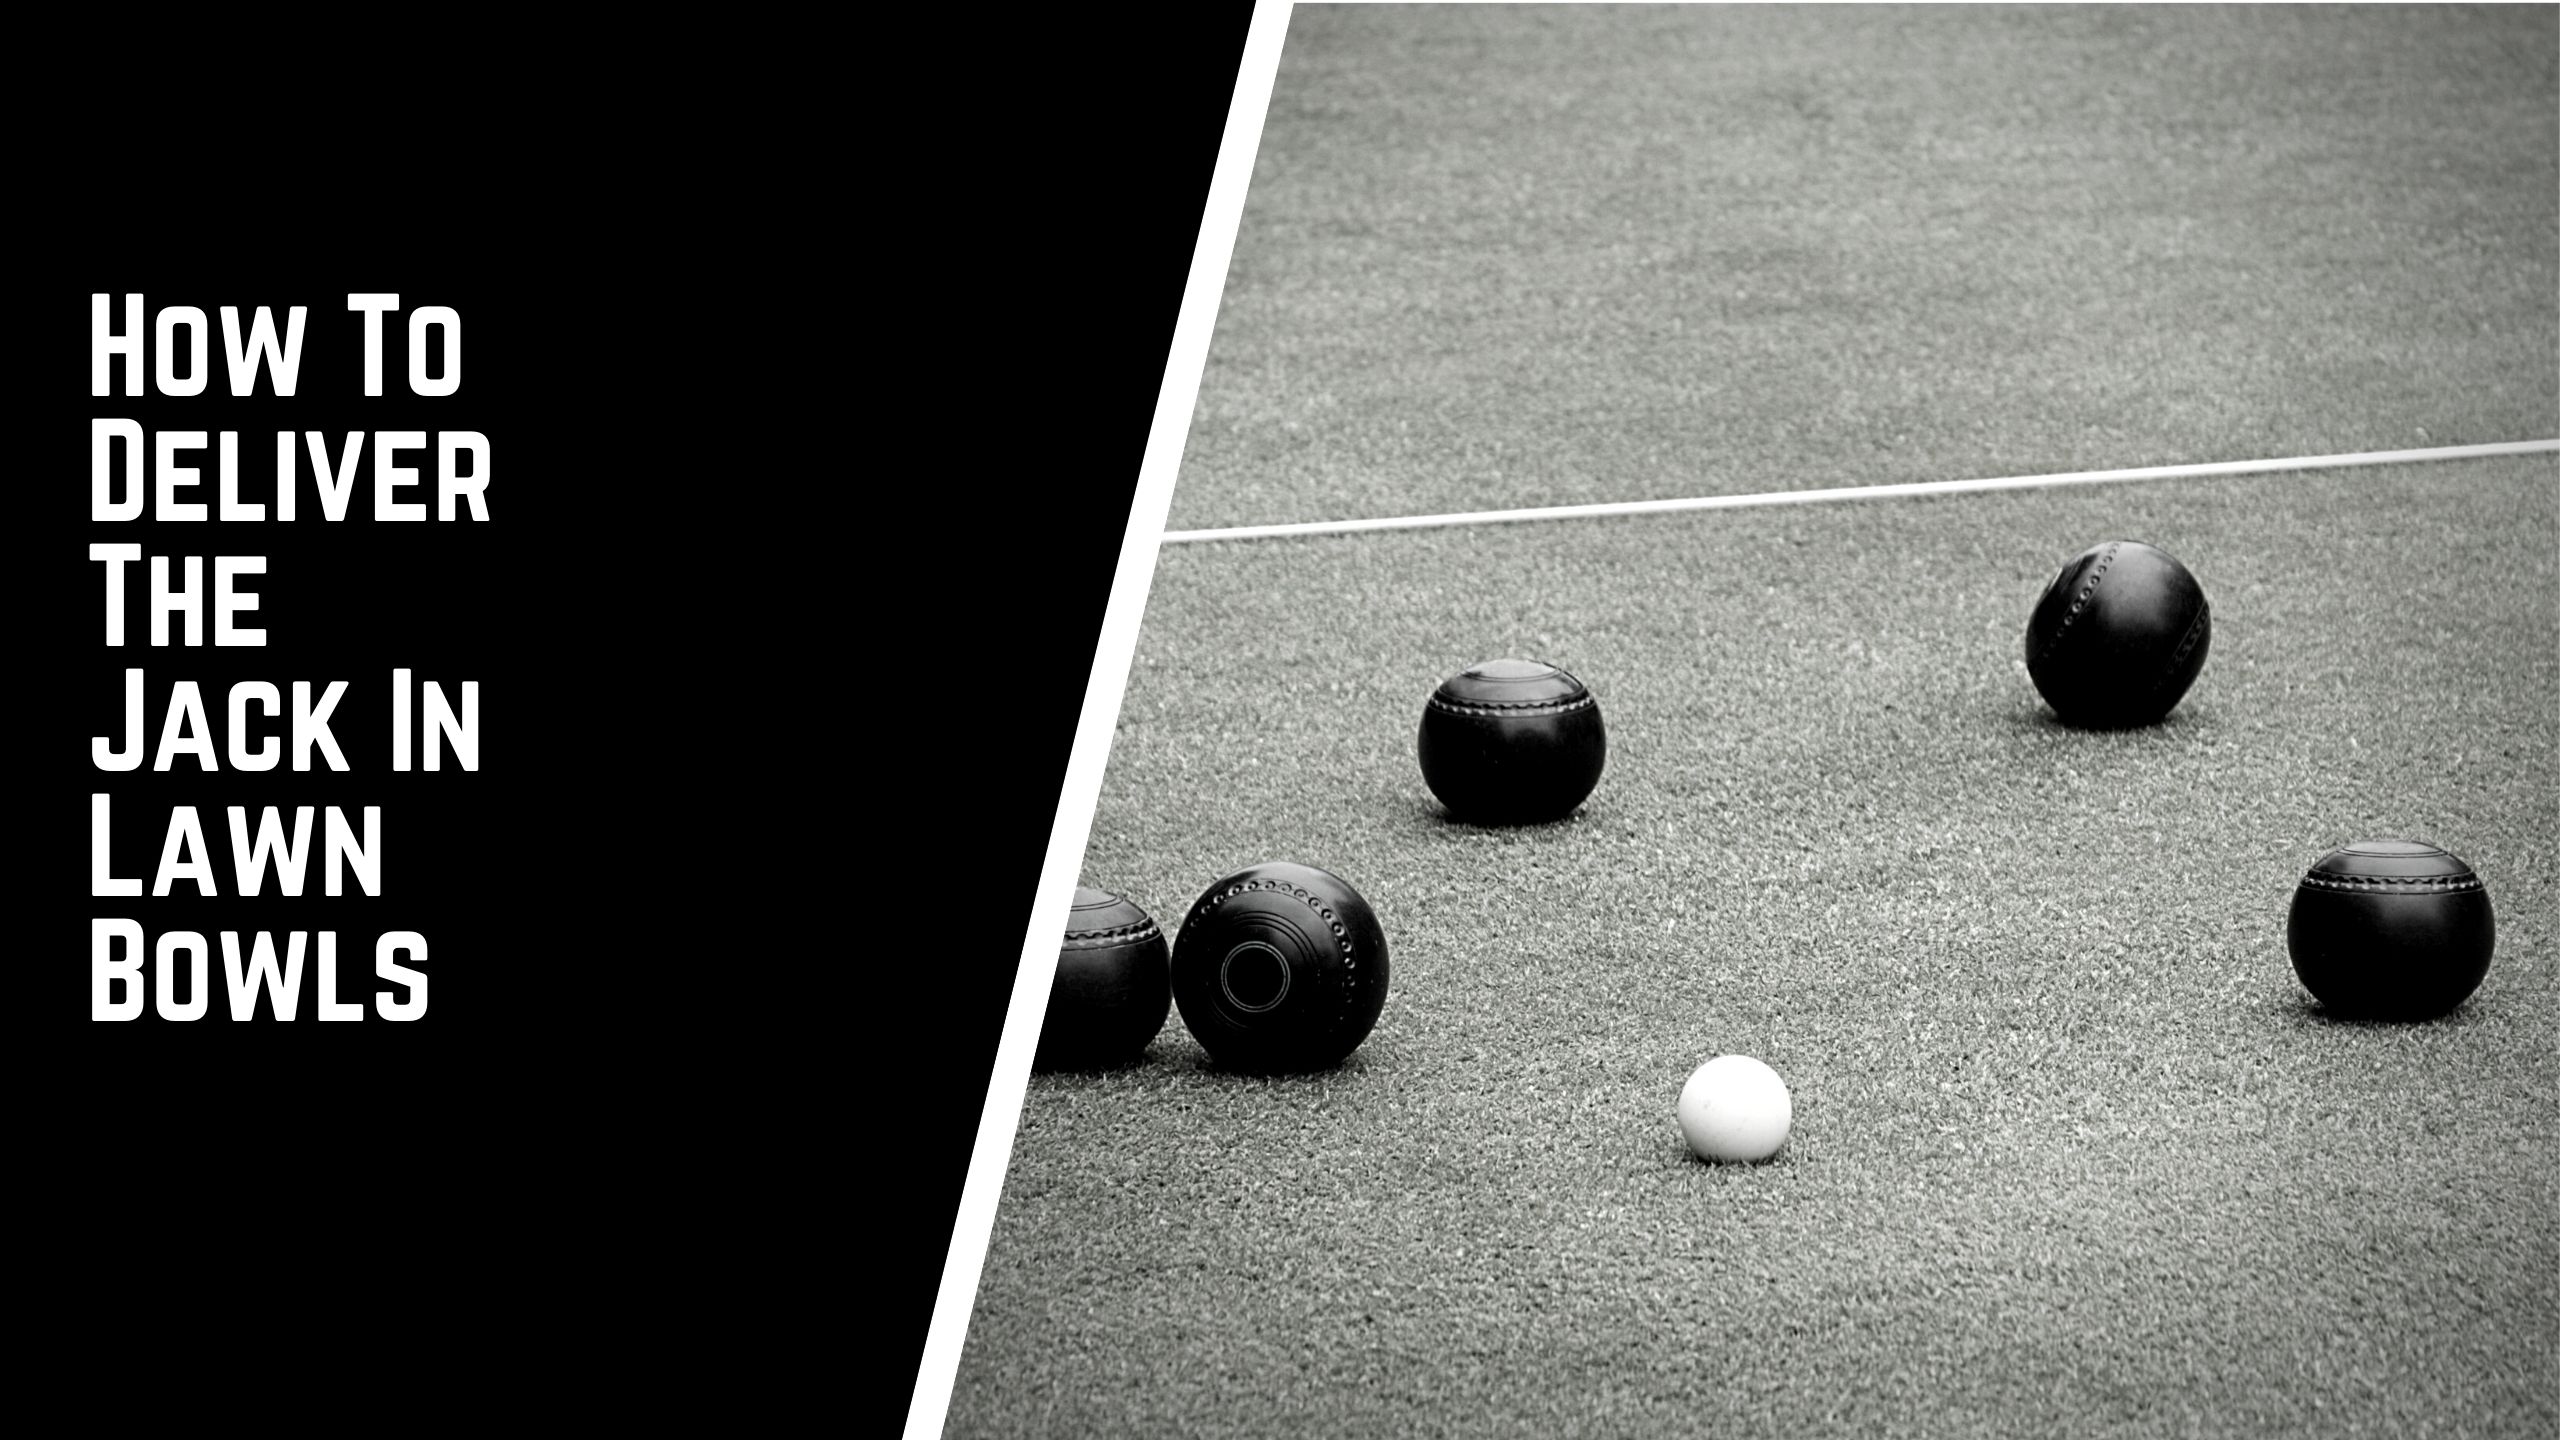 How To Deliver The Jack In Lawn Bowls